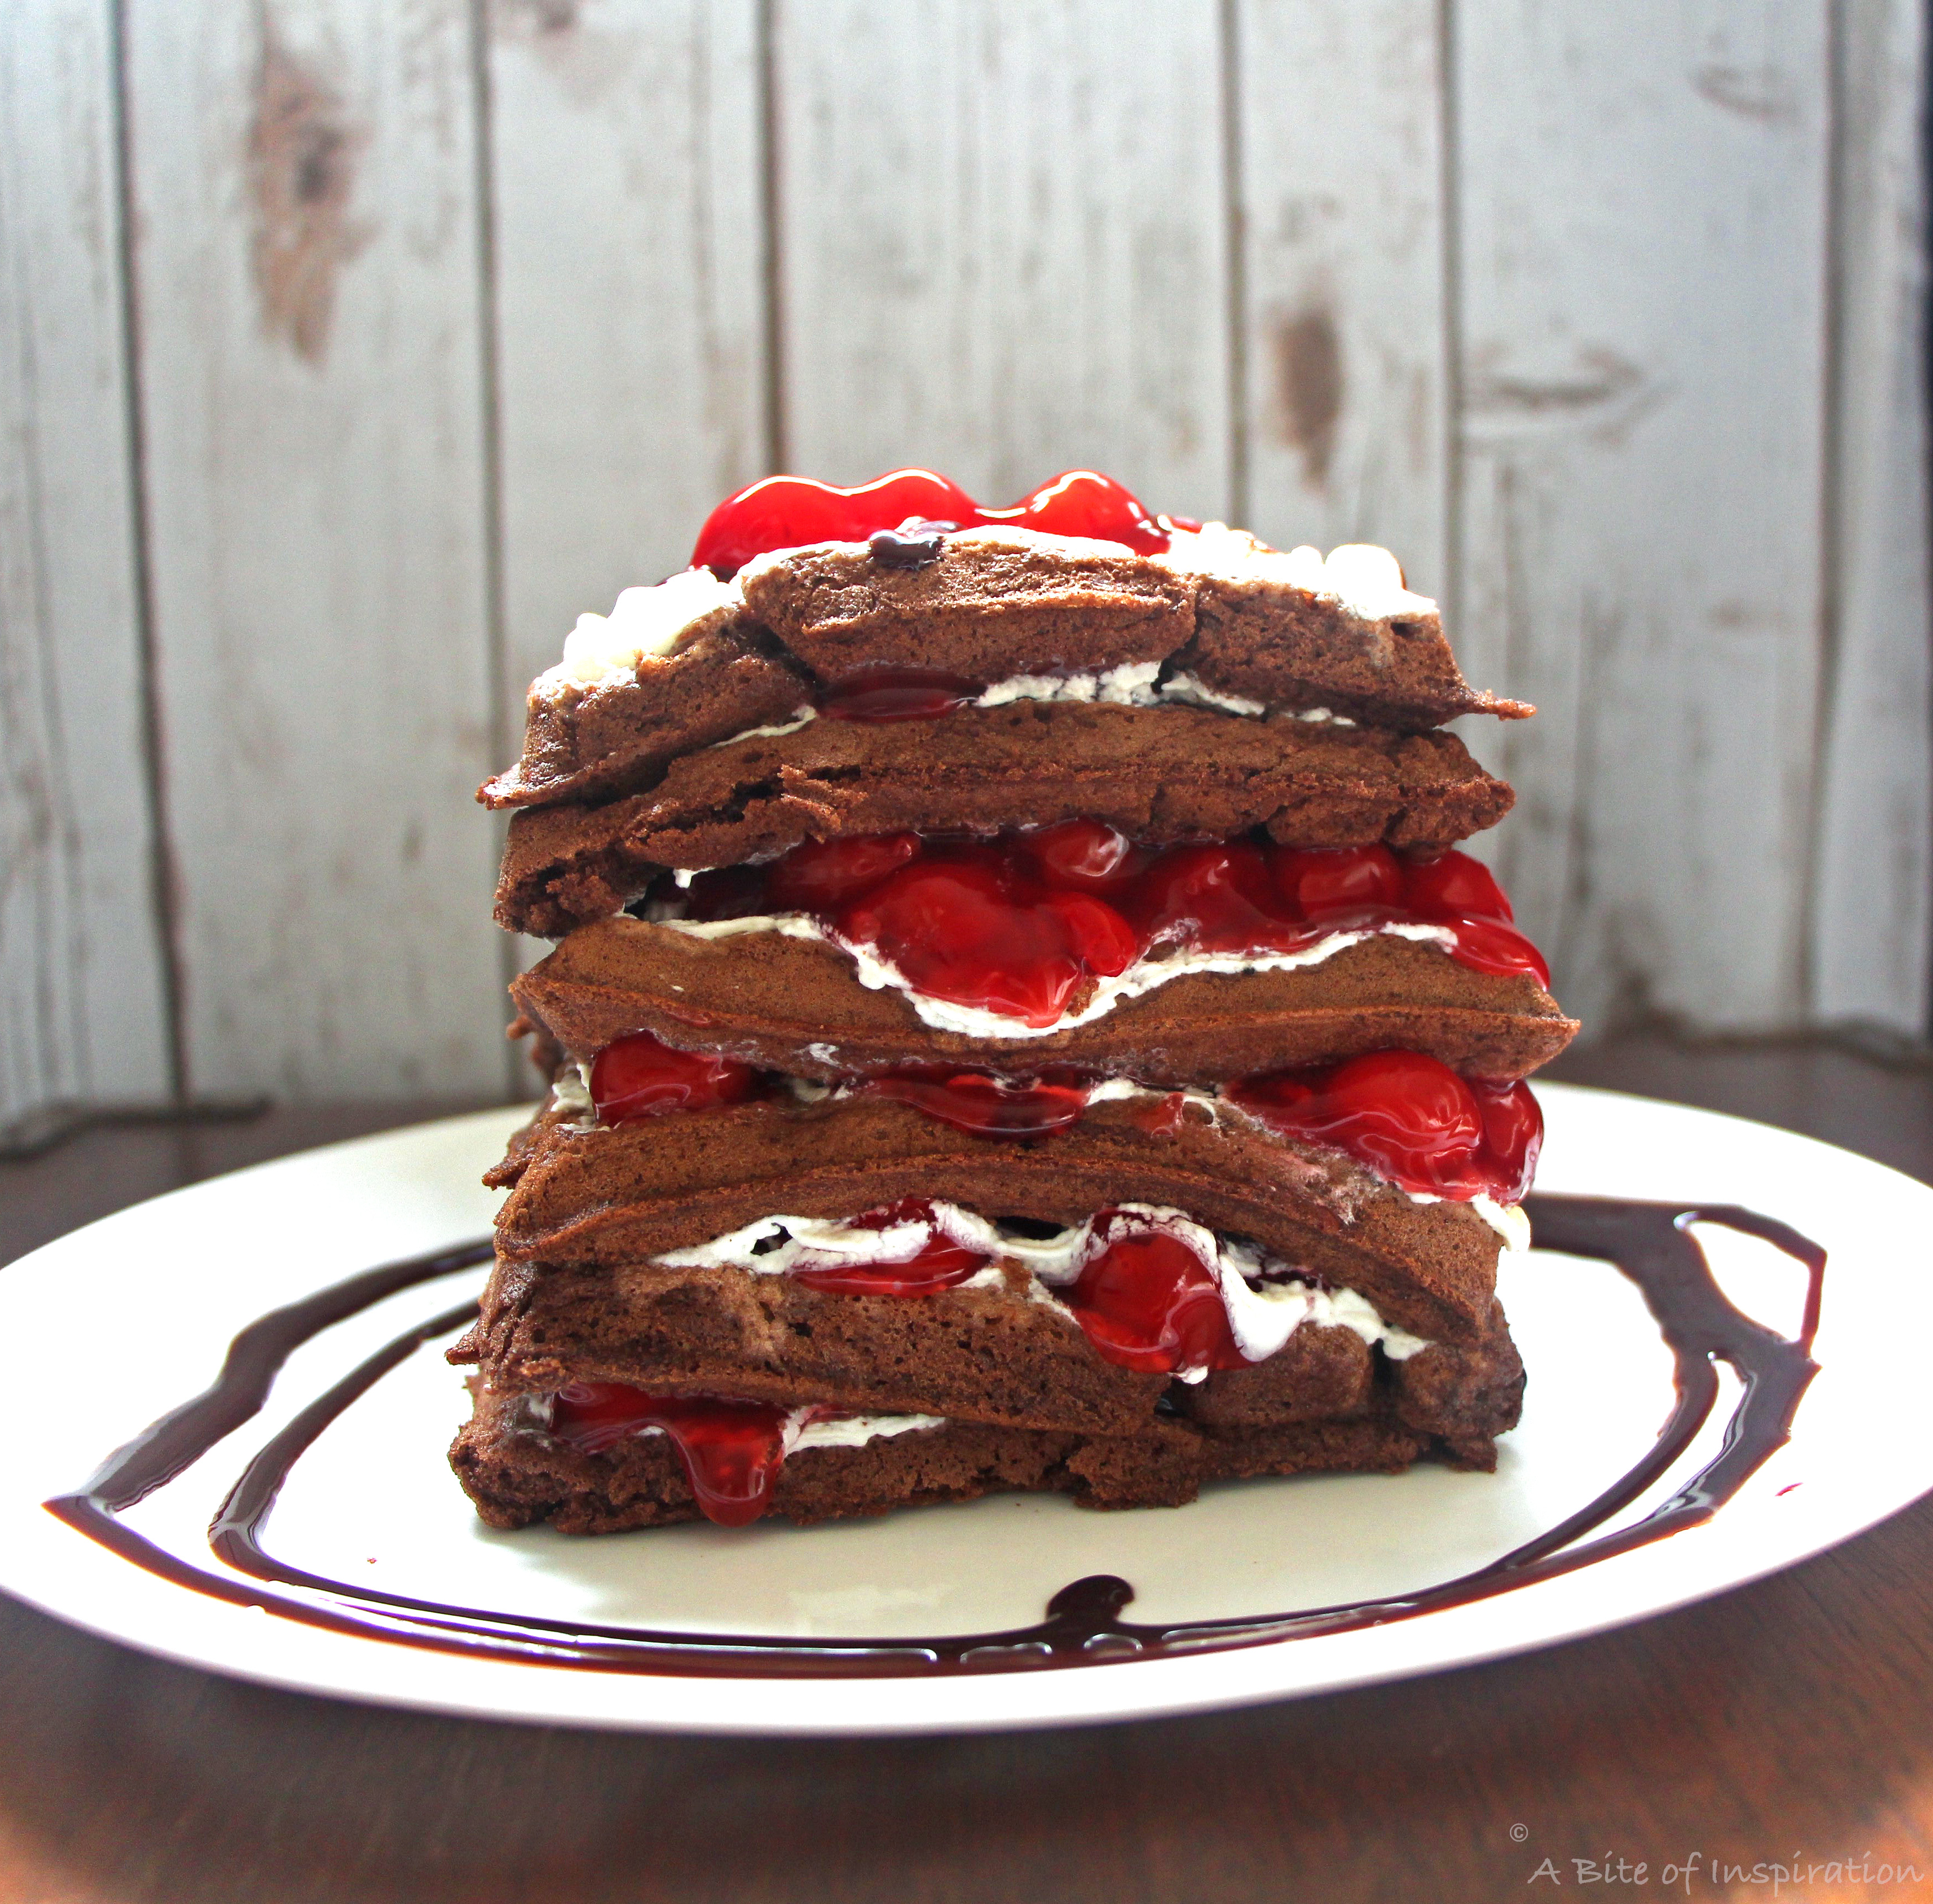 Chocolate cake waffles stacked high with whipped cream and cherries